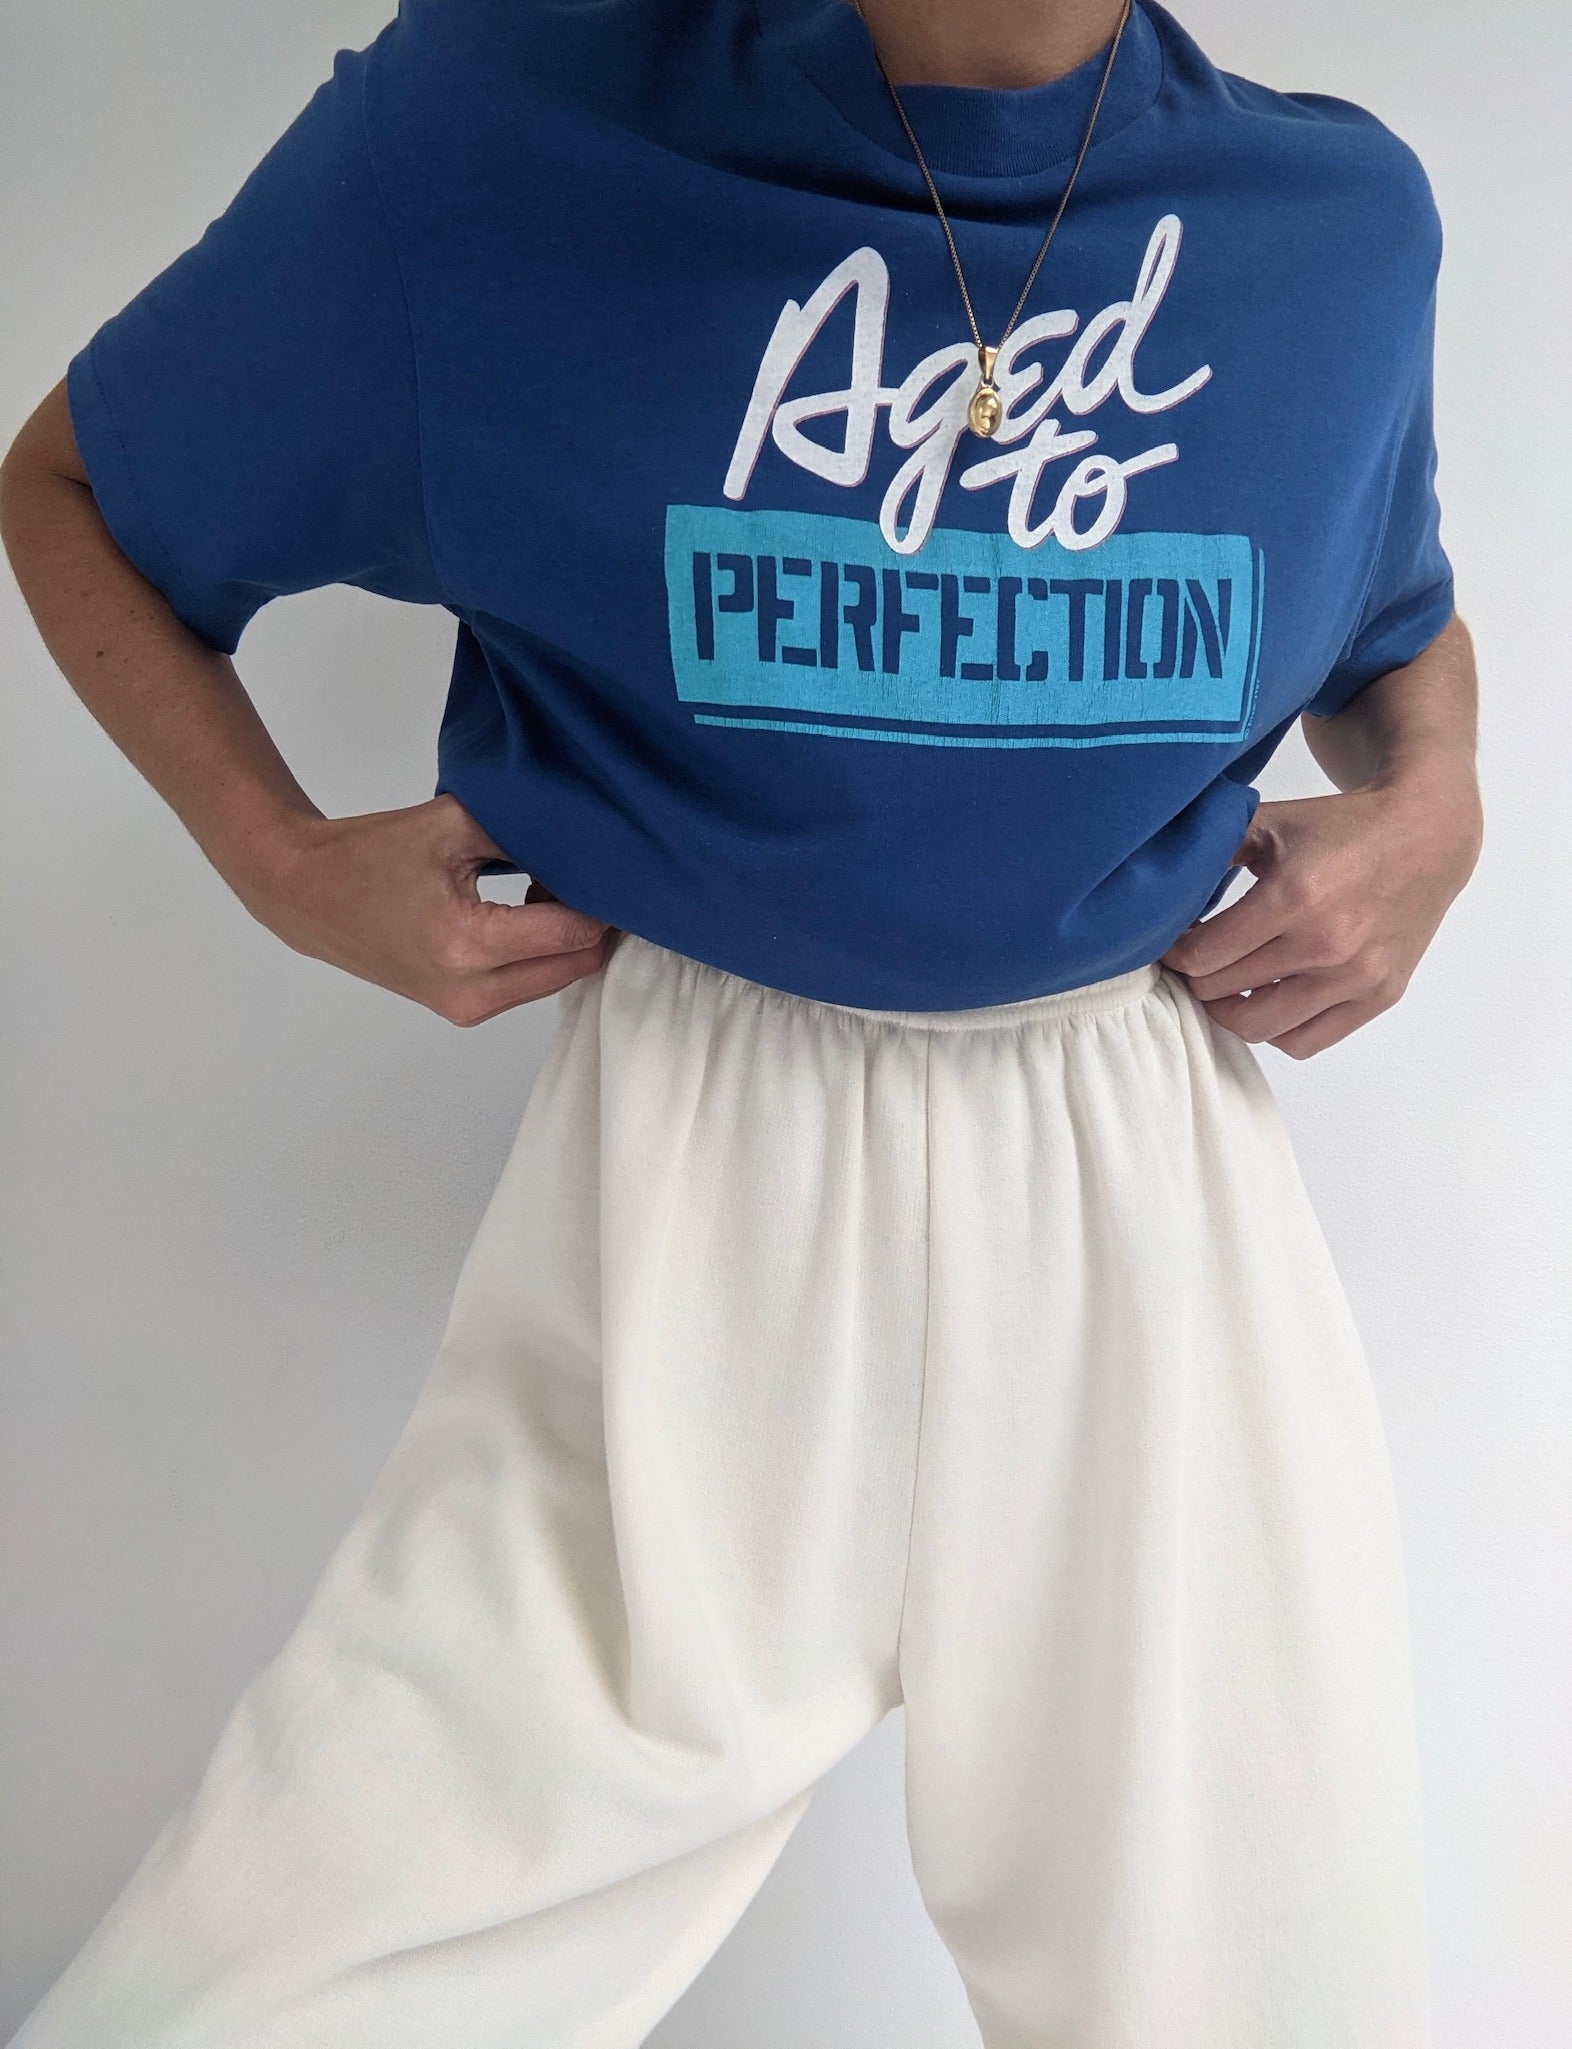 Vintage Favorite "Aged to Perfection" T-Shirt